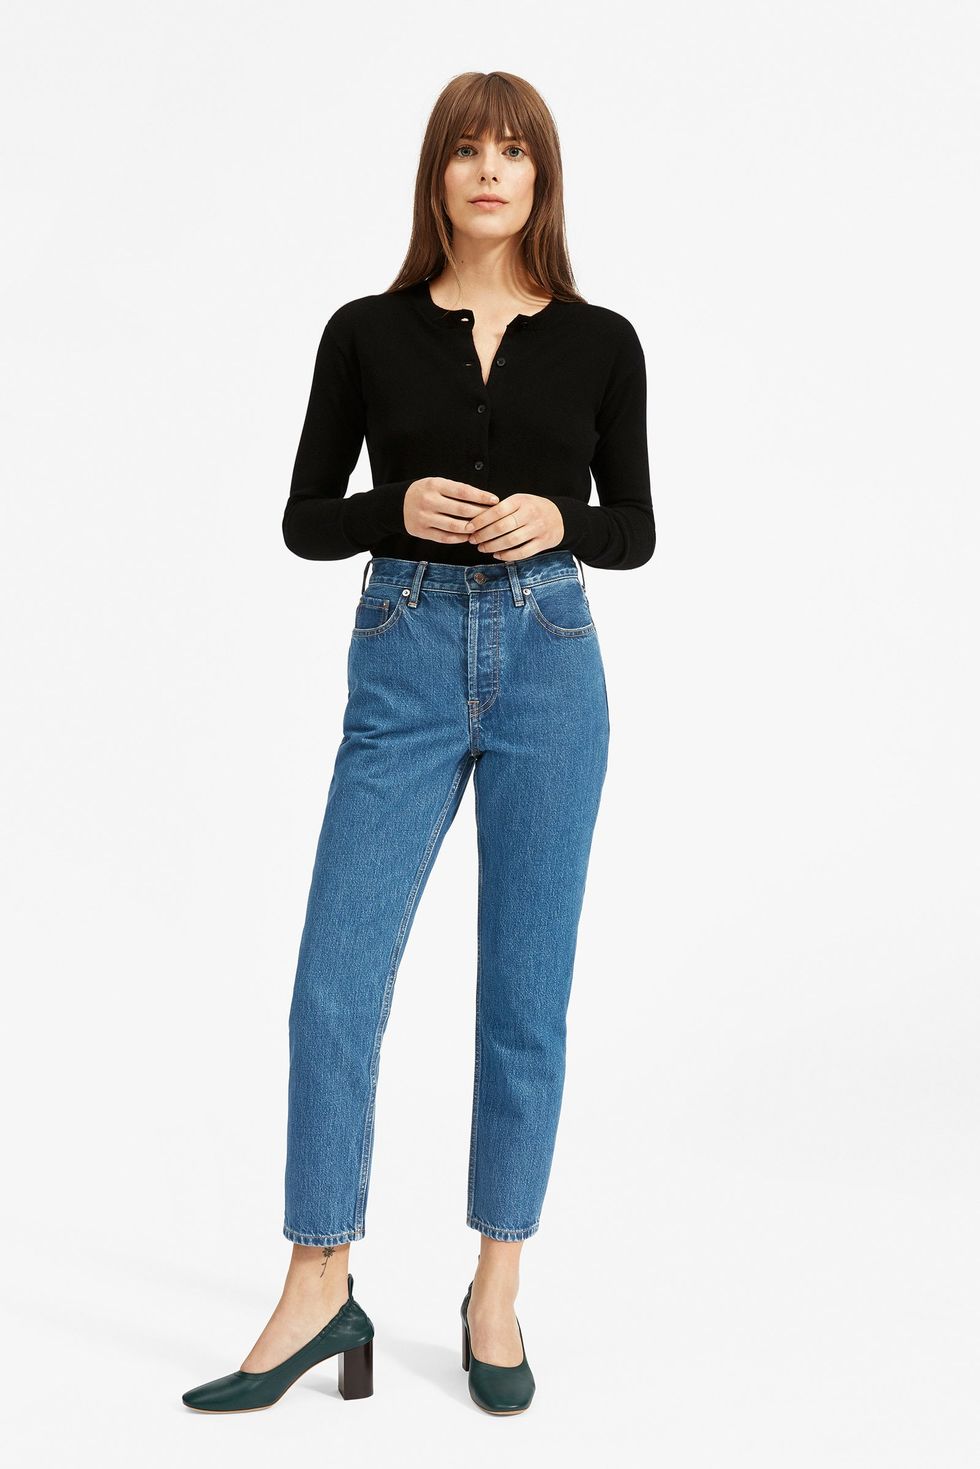 Everlane The '90s Cheeky Straight Jeans